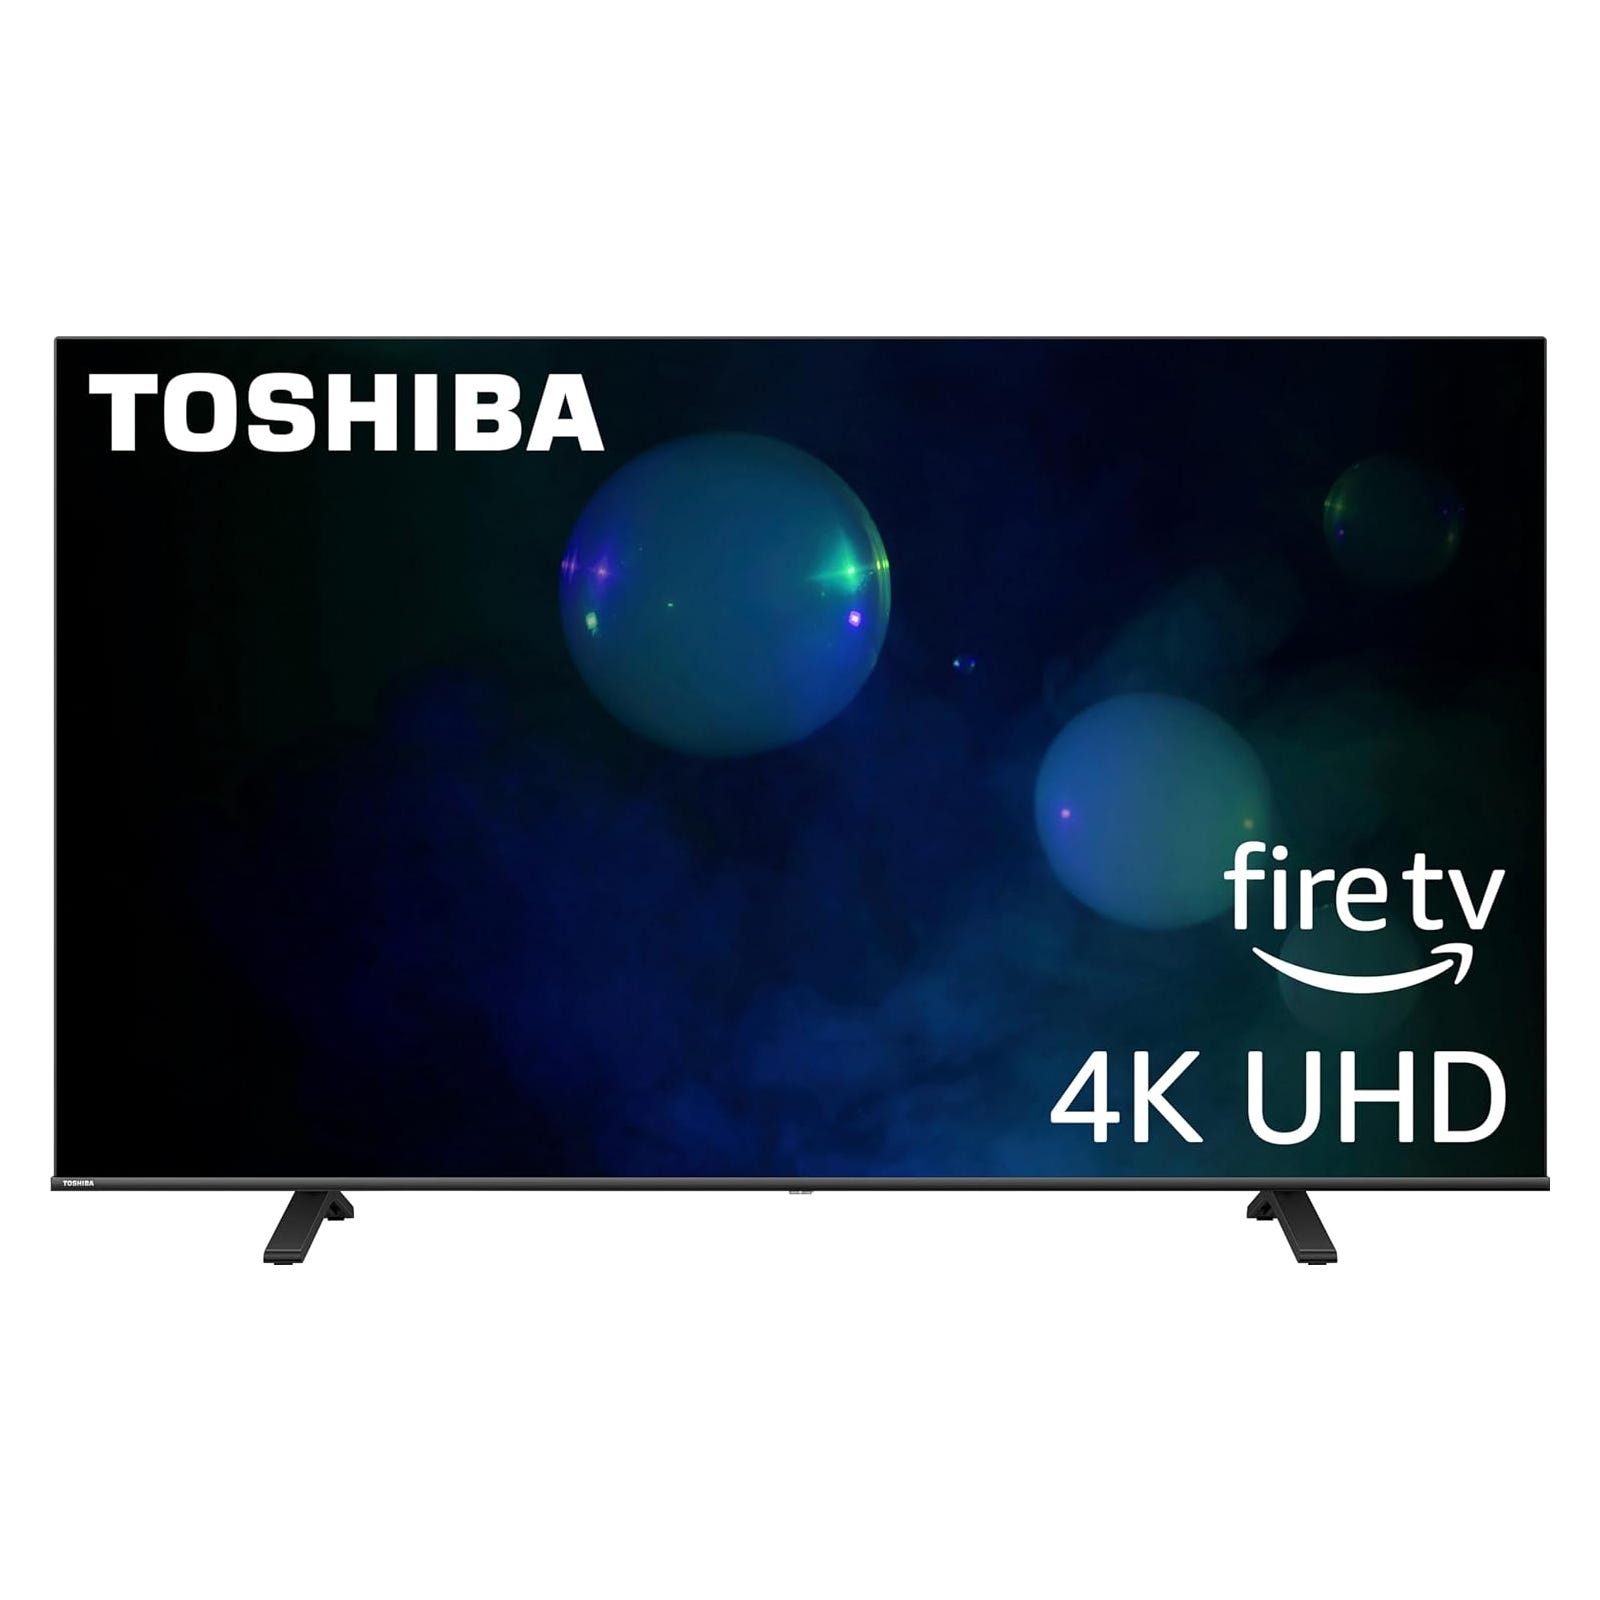 Toshiba 4K UHD television with Fire TV integration.